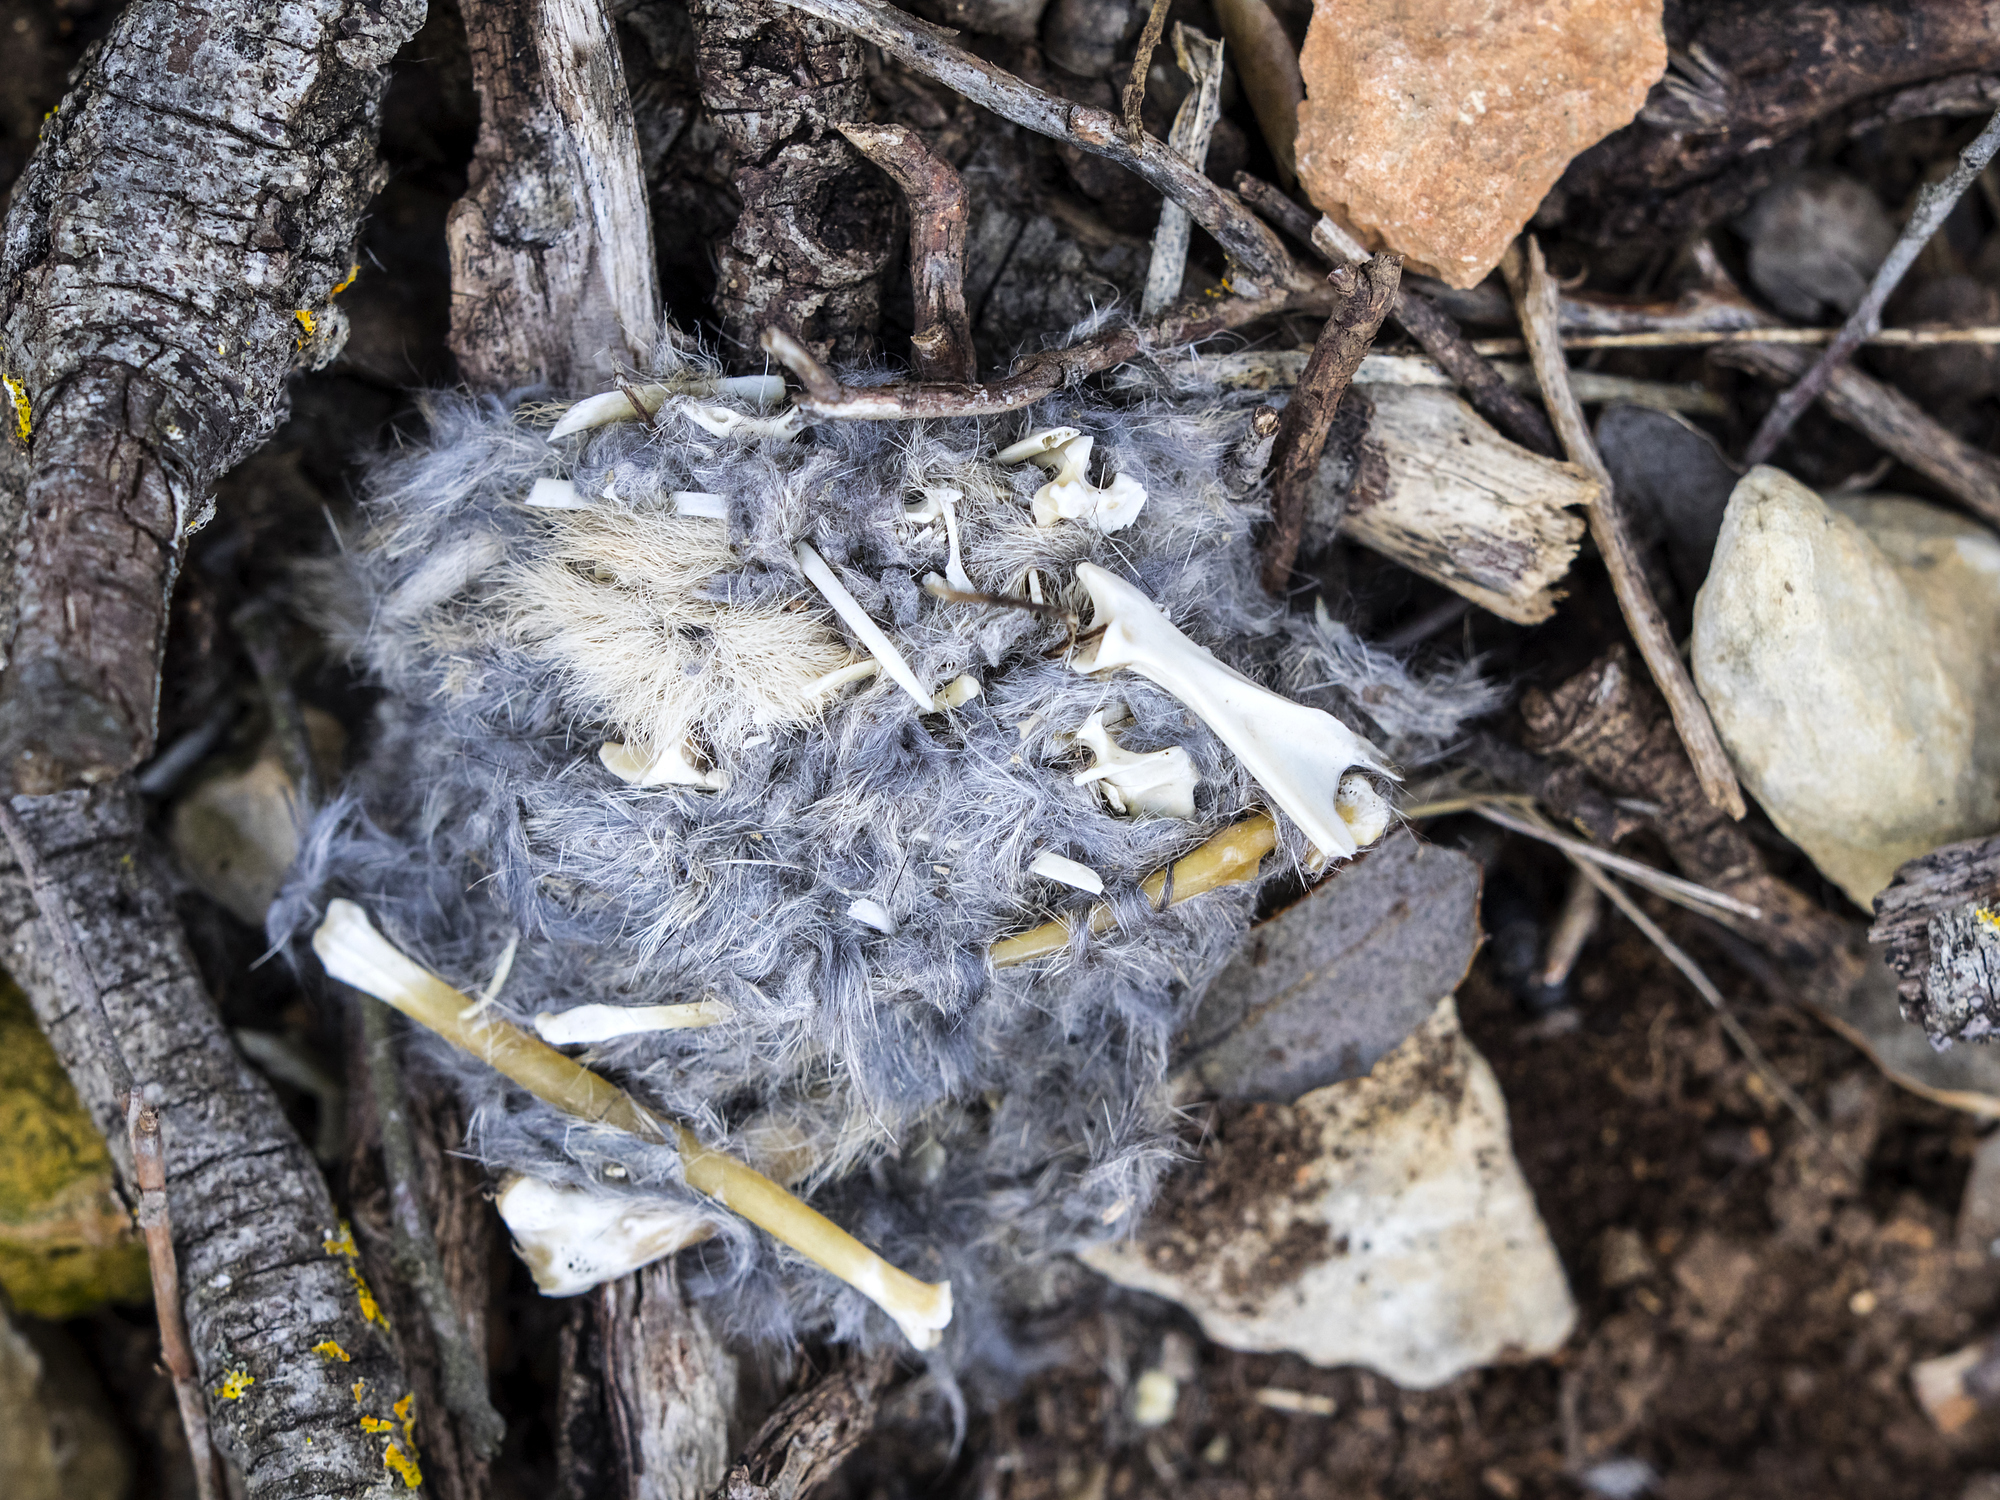 Owl pellets guide: how to identify and dissect - Discover Wildlife